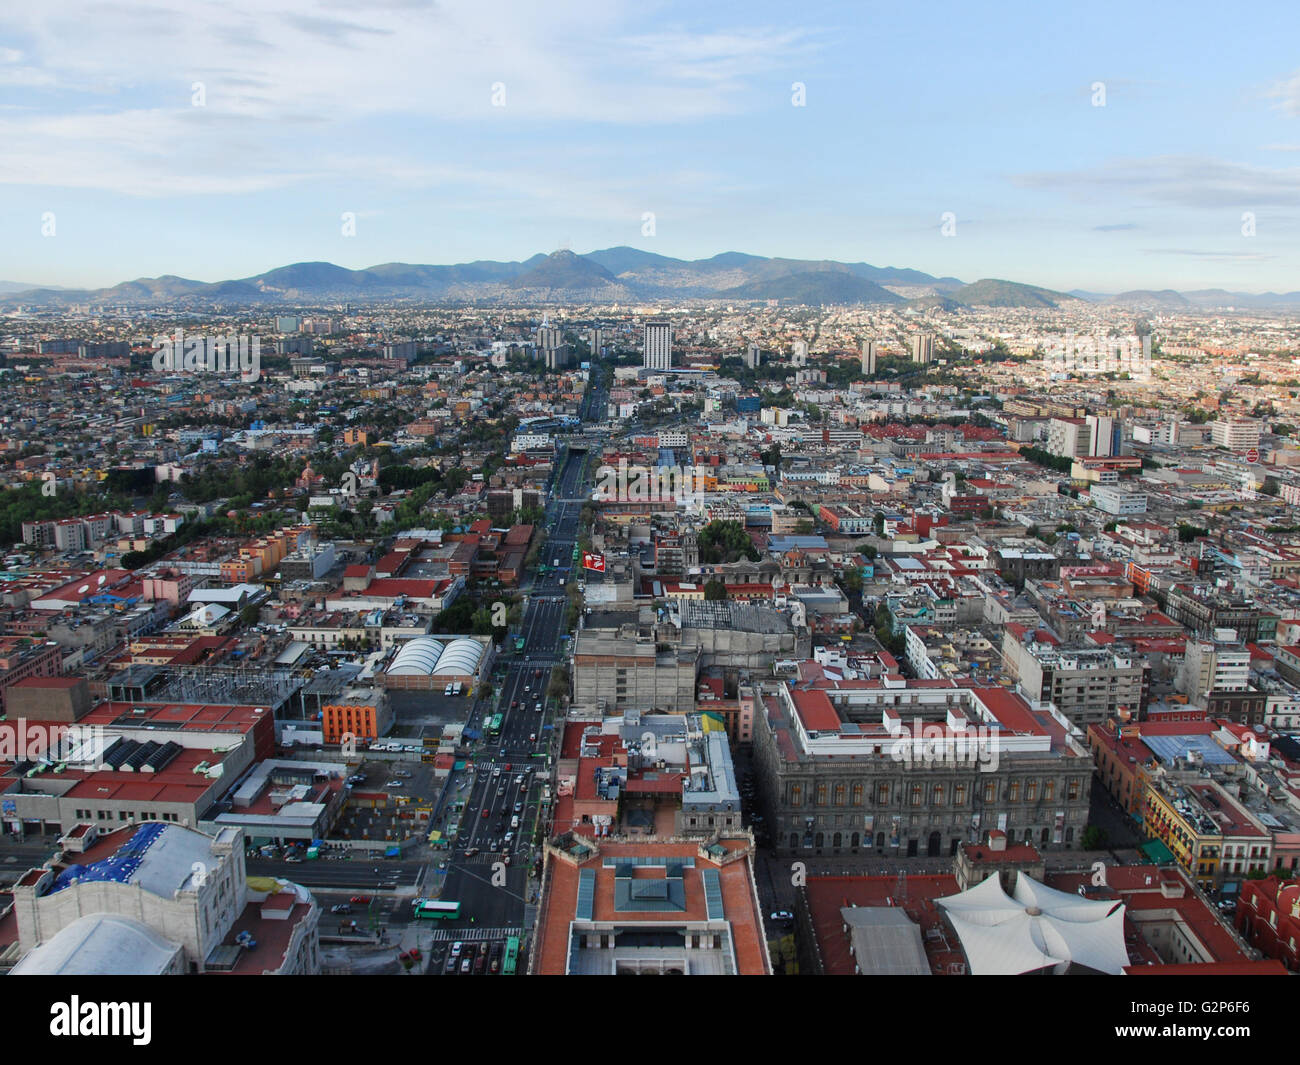 Aerial view of Mexico City, looking north from the viewing deck of Latin America Tower. Stock Photo